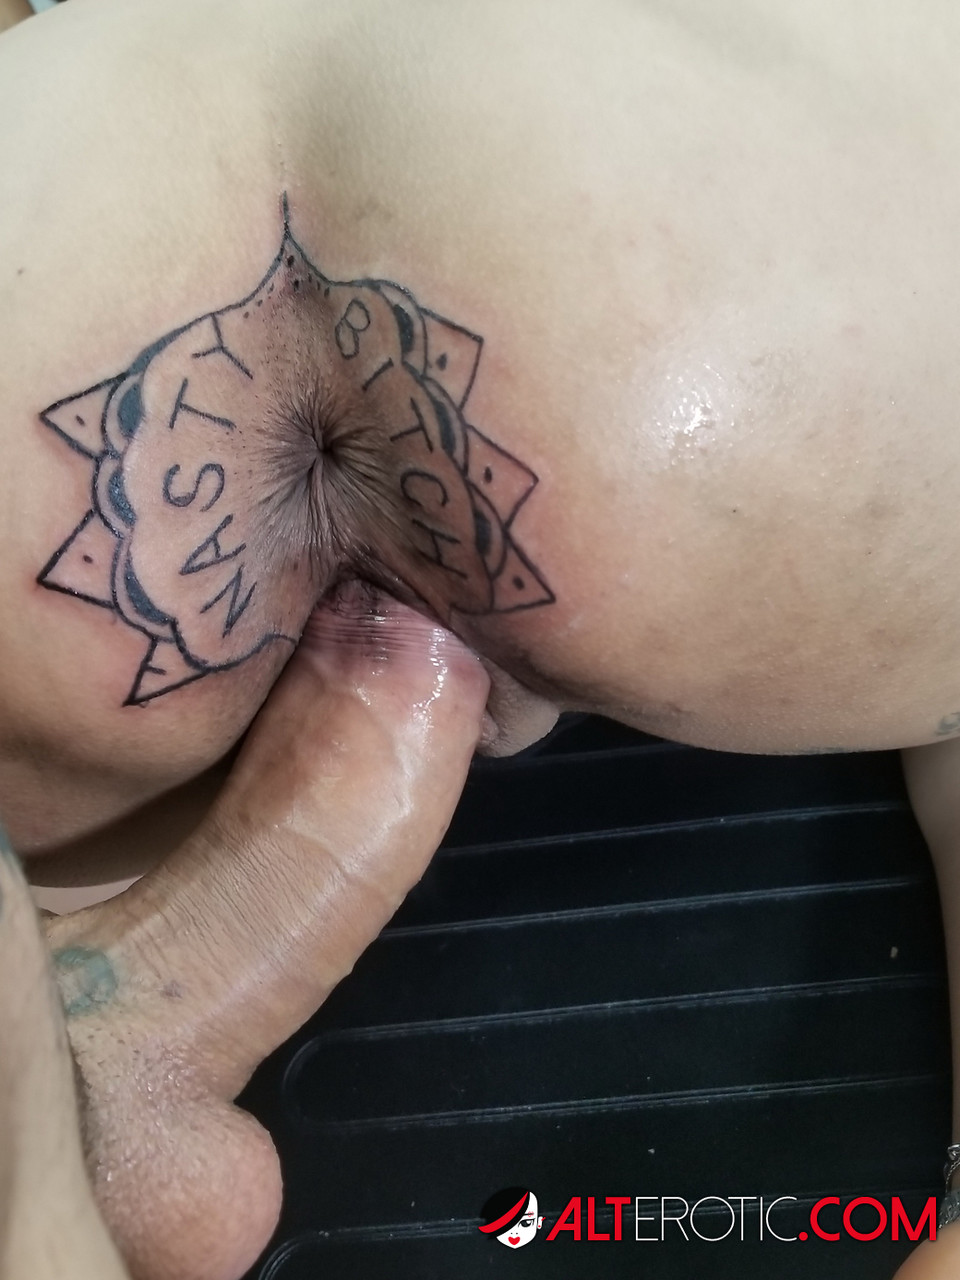 Latina chick Kitty Jaguar gets a butt tattoo before being fucked photo porno #424168461 | Alt Erotic Pics, Kitty Jaguar, Tattoo, porno mobile